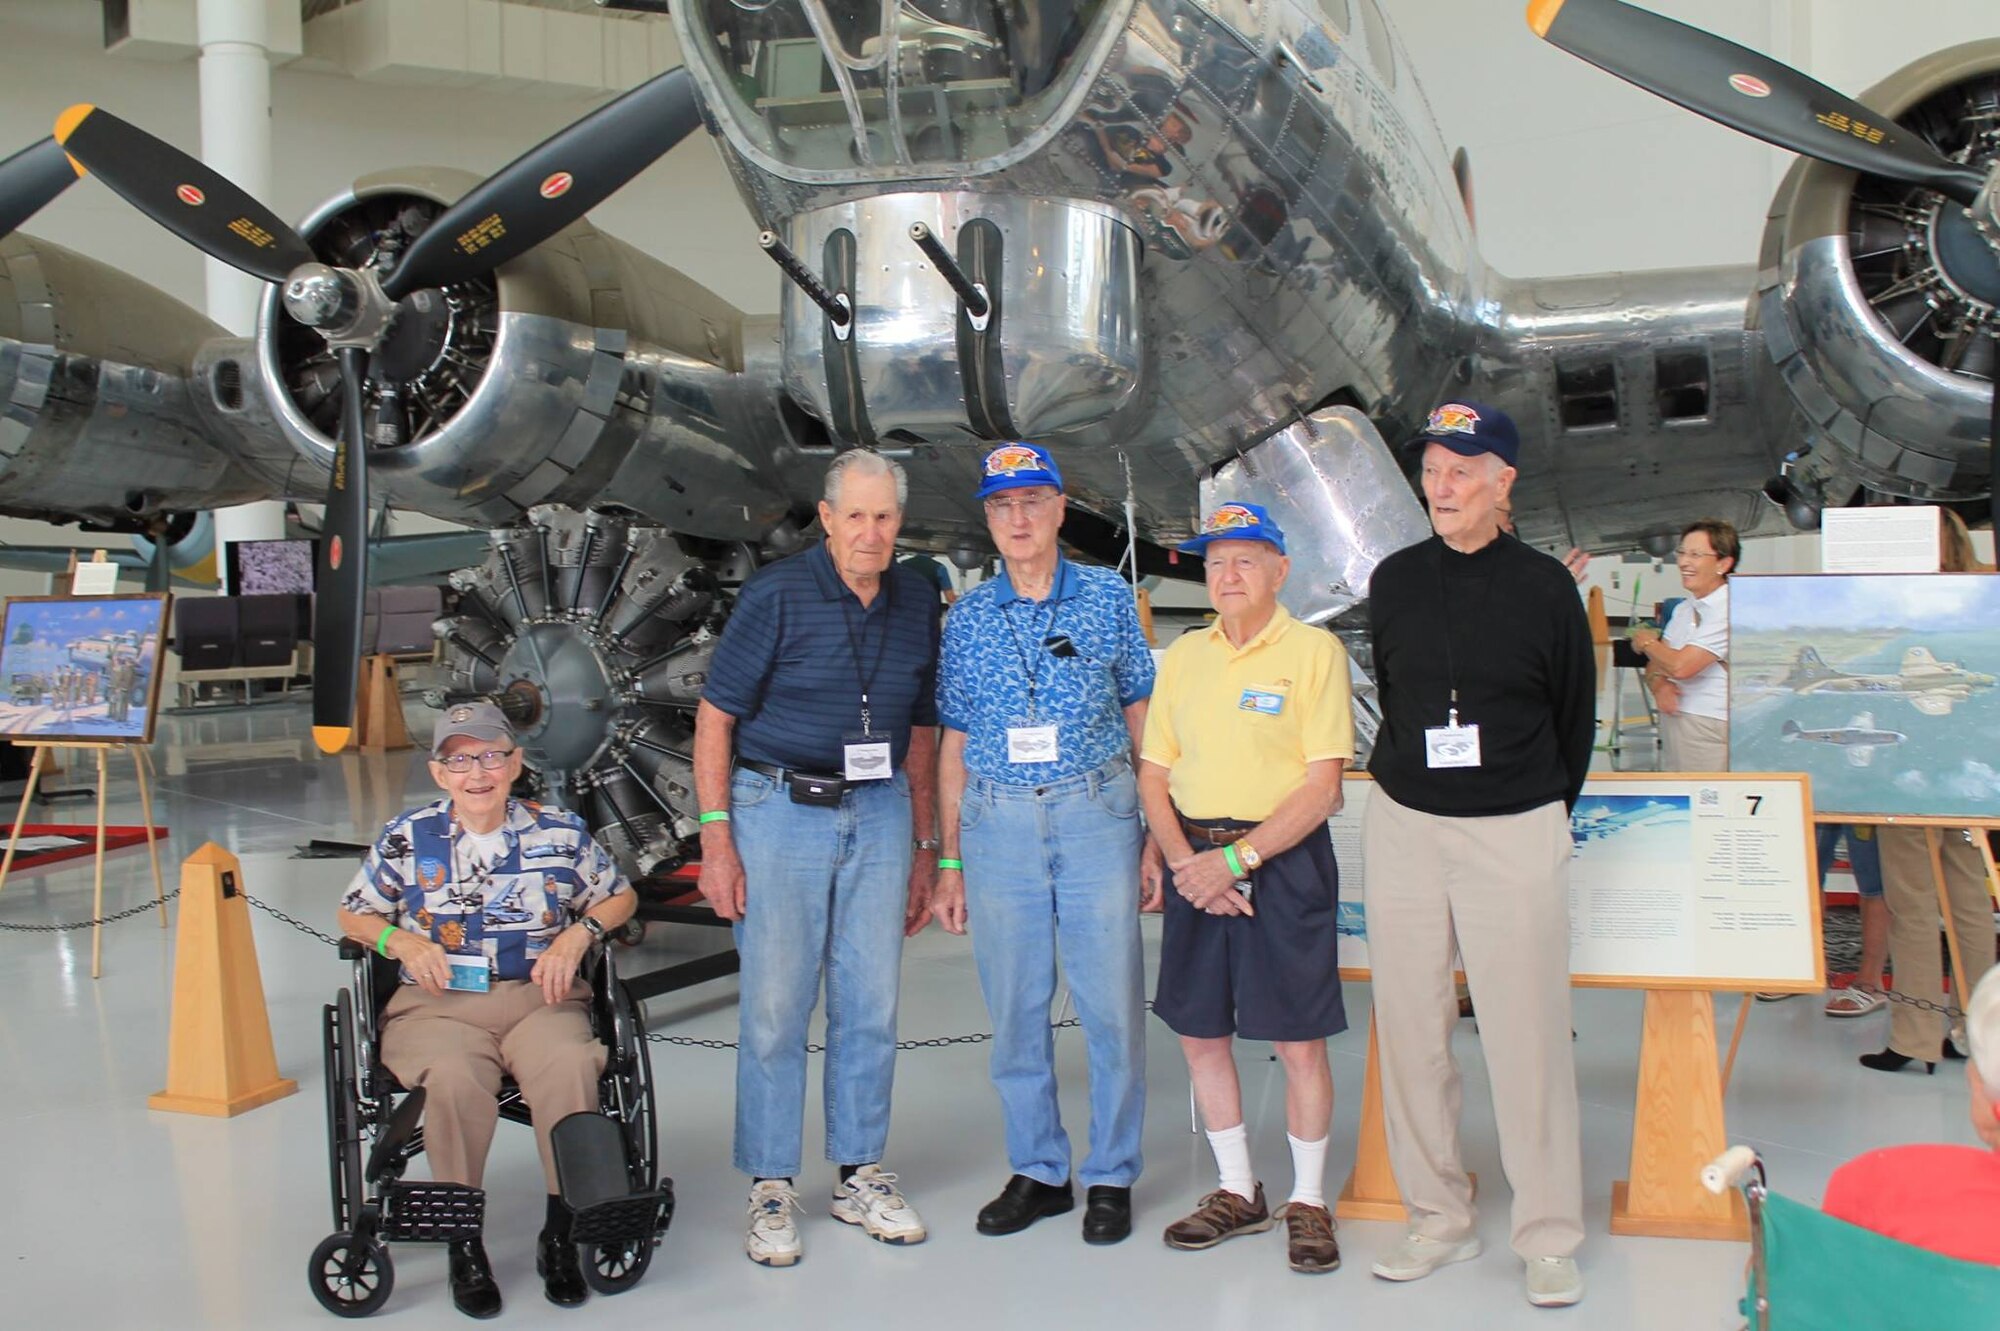 Veterans of the 6th Bomb Group pose for a picture in front of a Boeing B-17G Flying Fortress at the Evergreen Aviation & Space Museum in McMinnville, Oregon, on 11 September 2015.  From left to right are Dick Randall, Ed Vincent, Virgil Morgan, Bob Frick and Warren Higgins.  (Courtesy Mr. Philip Conroy)